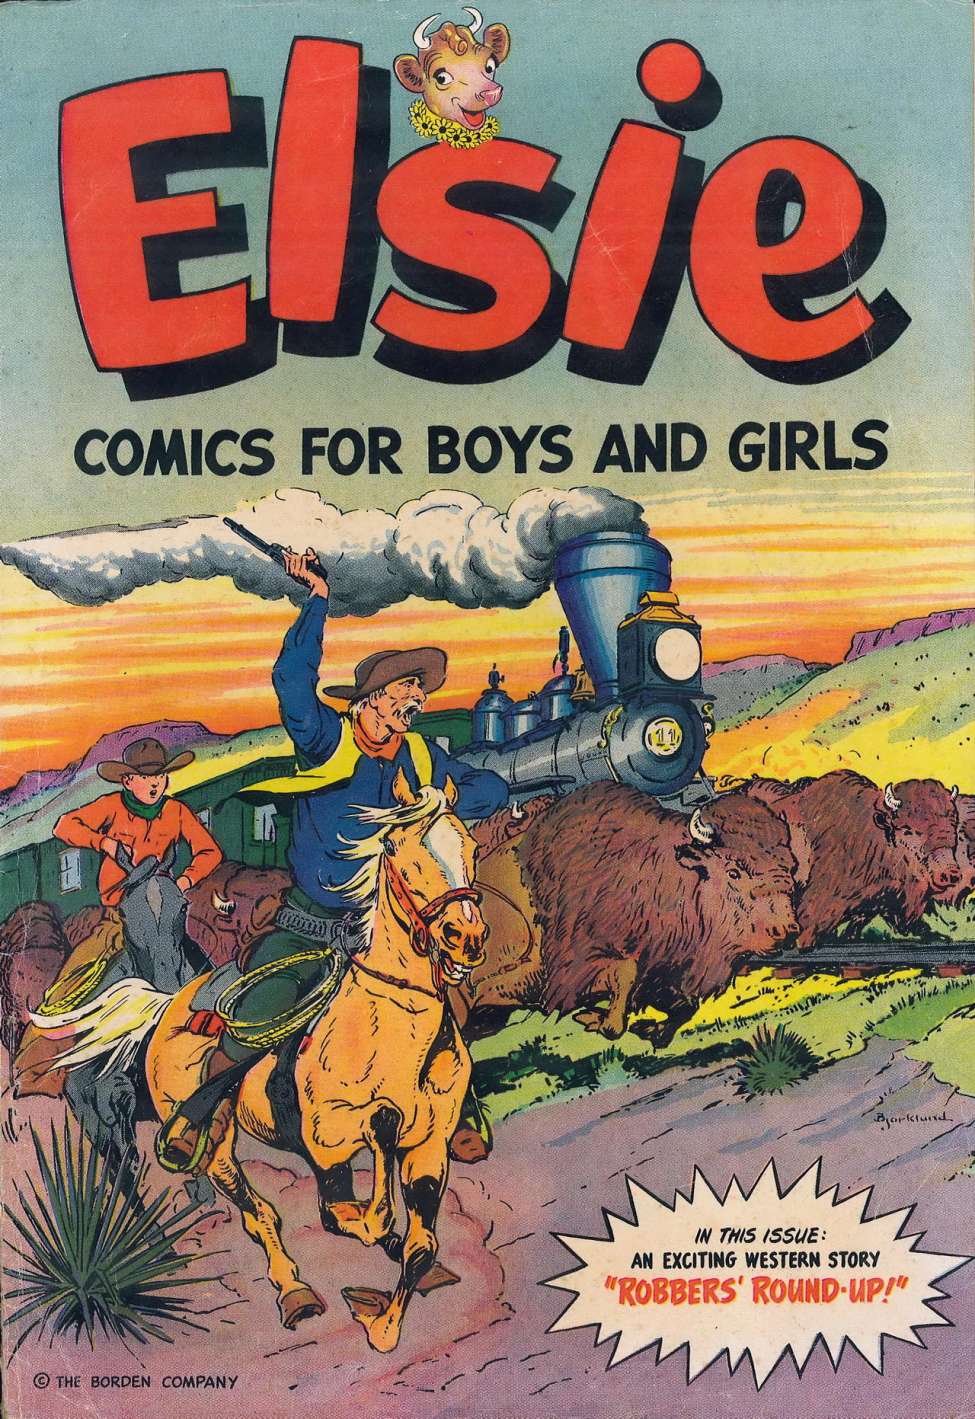 Book Cover For Elsie Comics For Boys and Girls (nn)